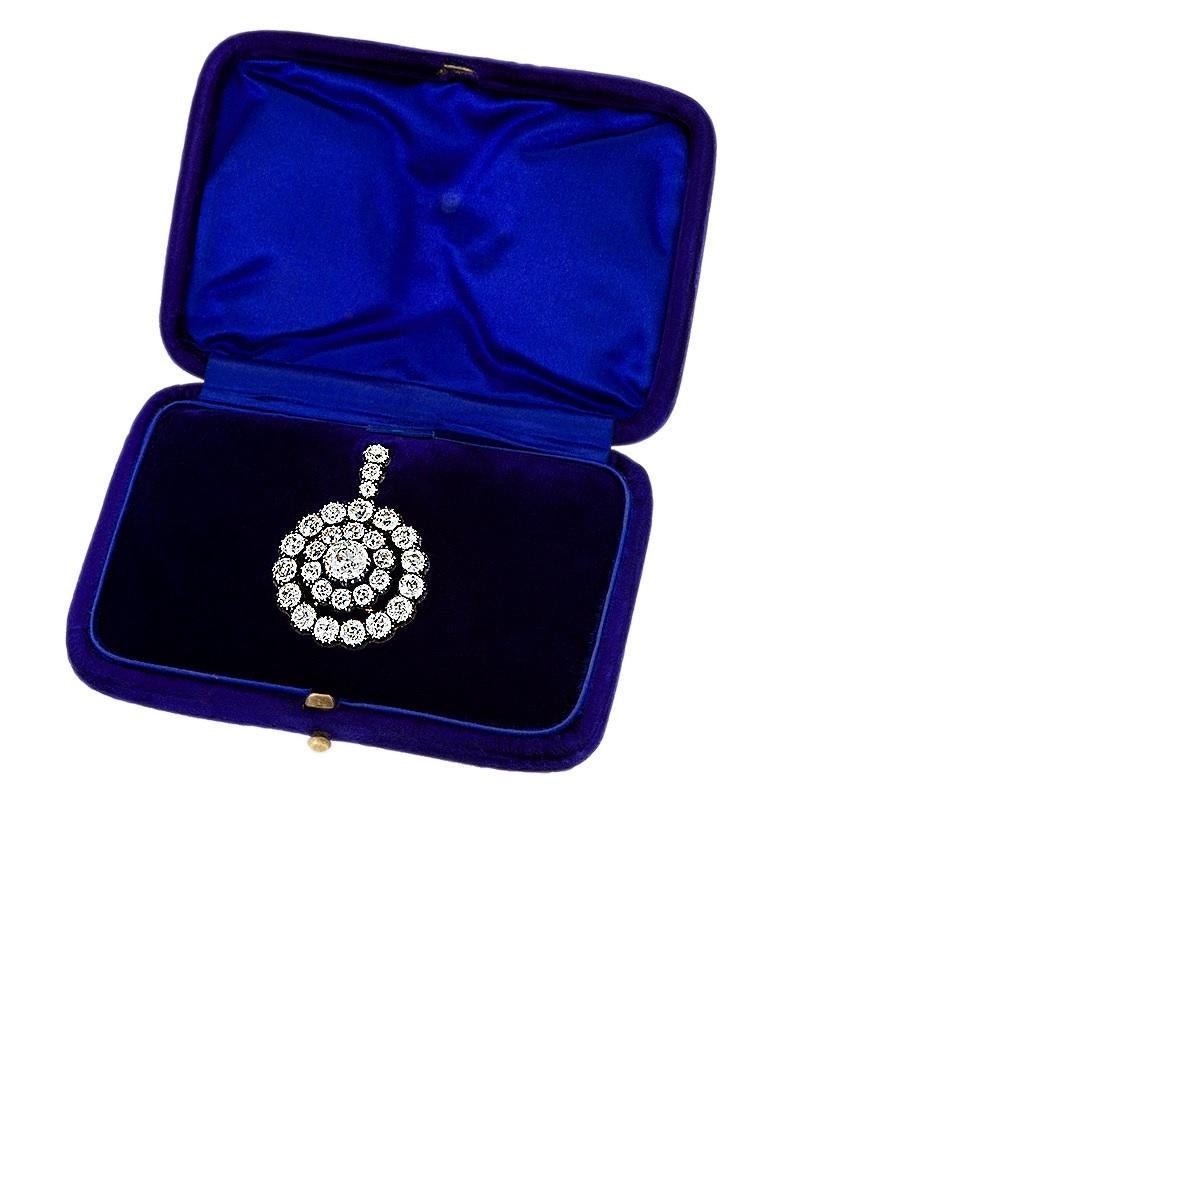 An Antique silver-topped gold pendant with a diamond-studded pendant loop featuring two rings of old European-cut diamonds surrounding one exceptional, significant center stone. The center diamond is approximately 2.35 carats, surrounded by 10 old